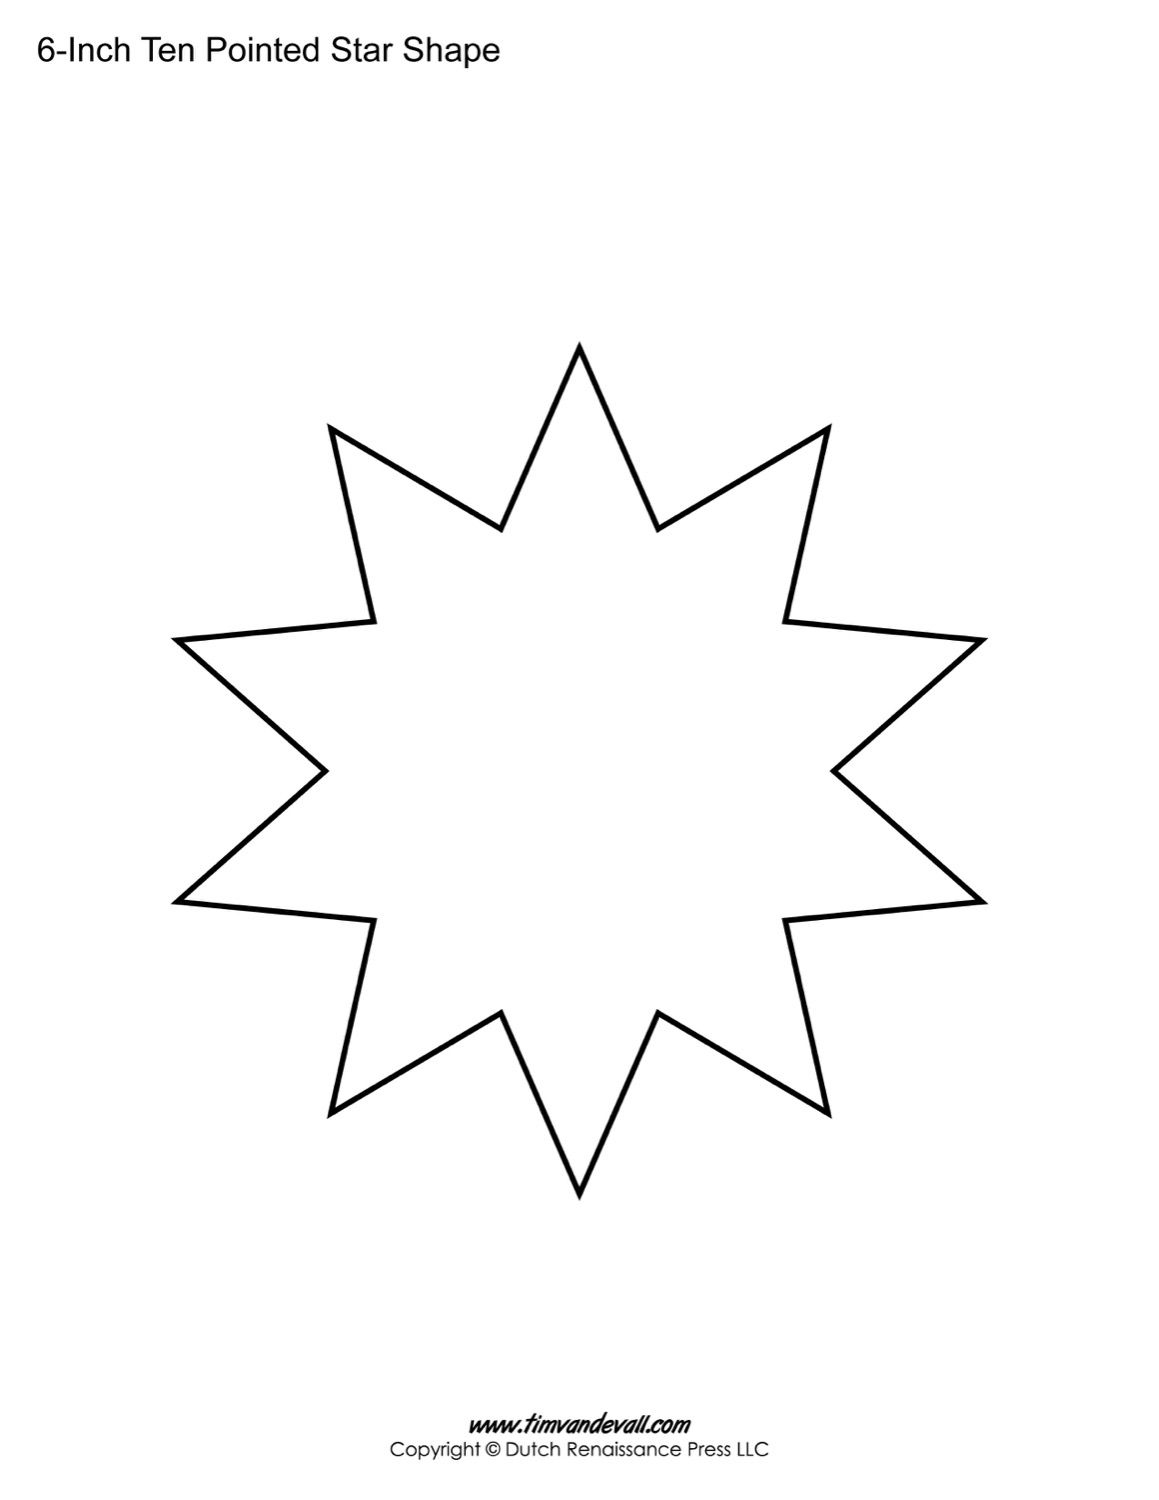 Blank Ten Pointed Star Shapes | Printable Star Template for Art Crafts